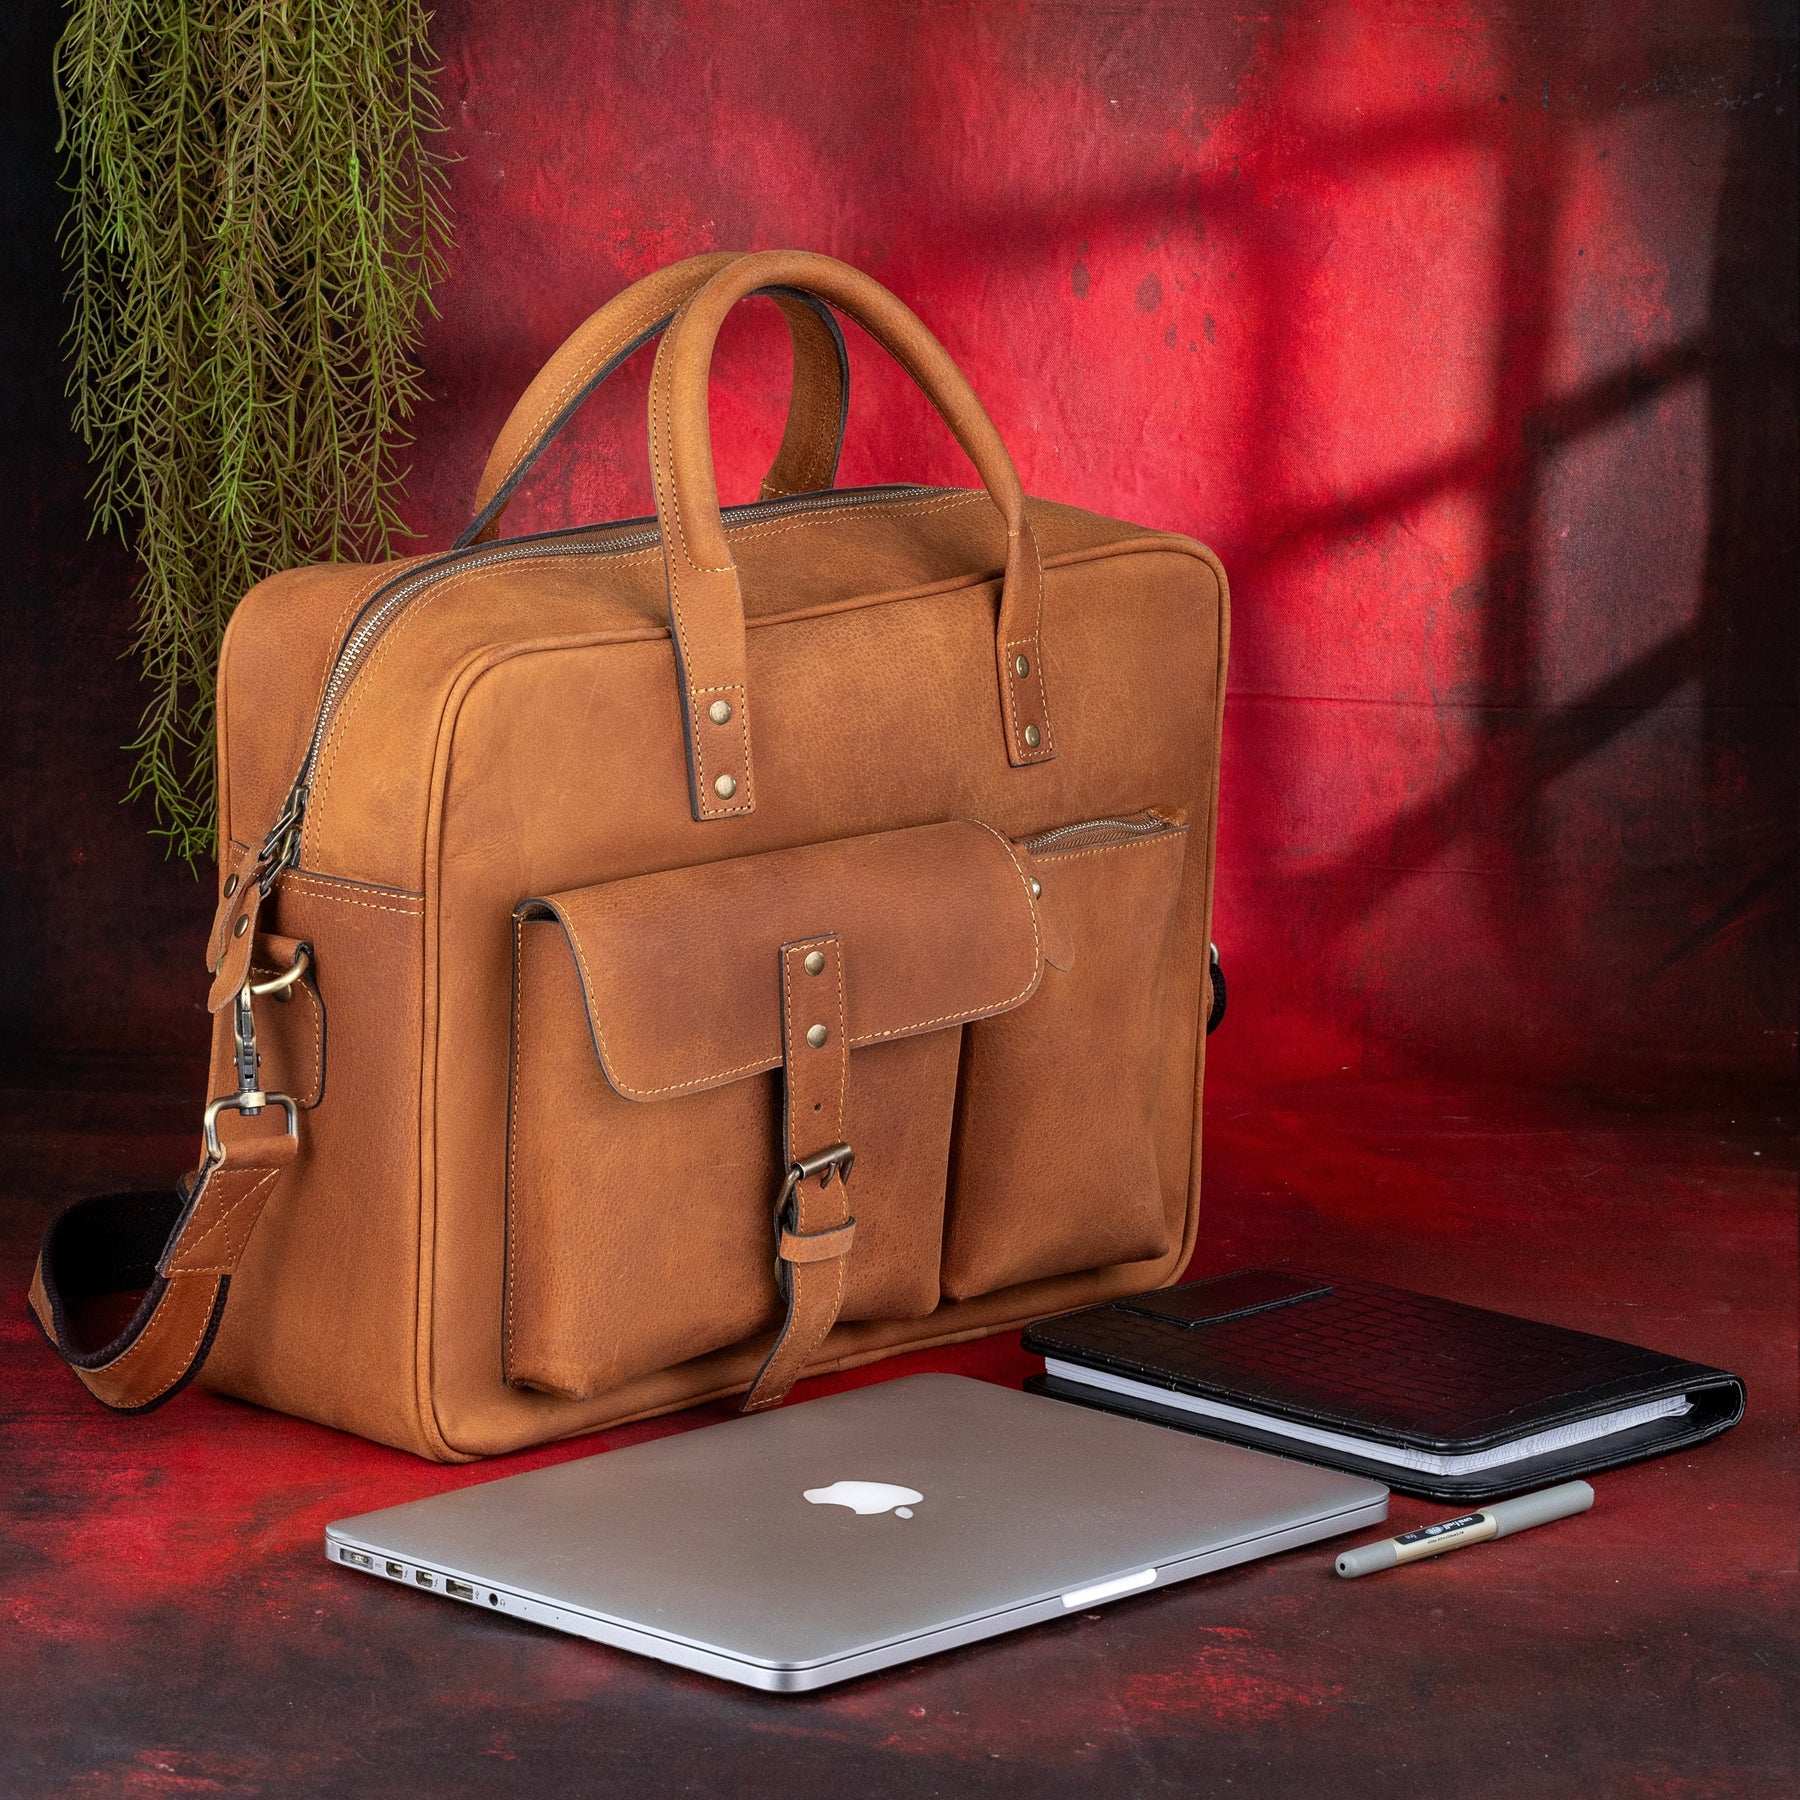 Royal Arch Chapter Briefcase - Brown Leather - Bricks Masons